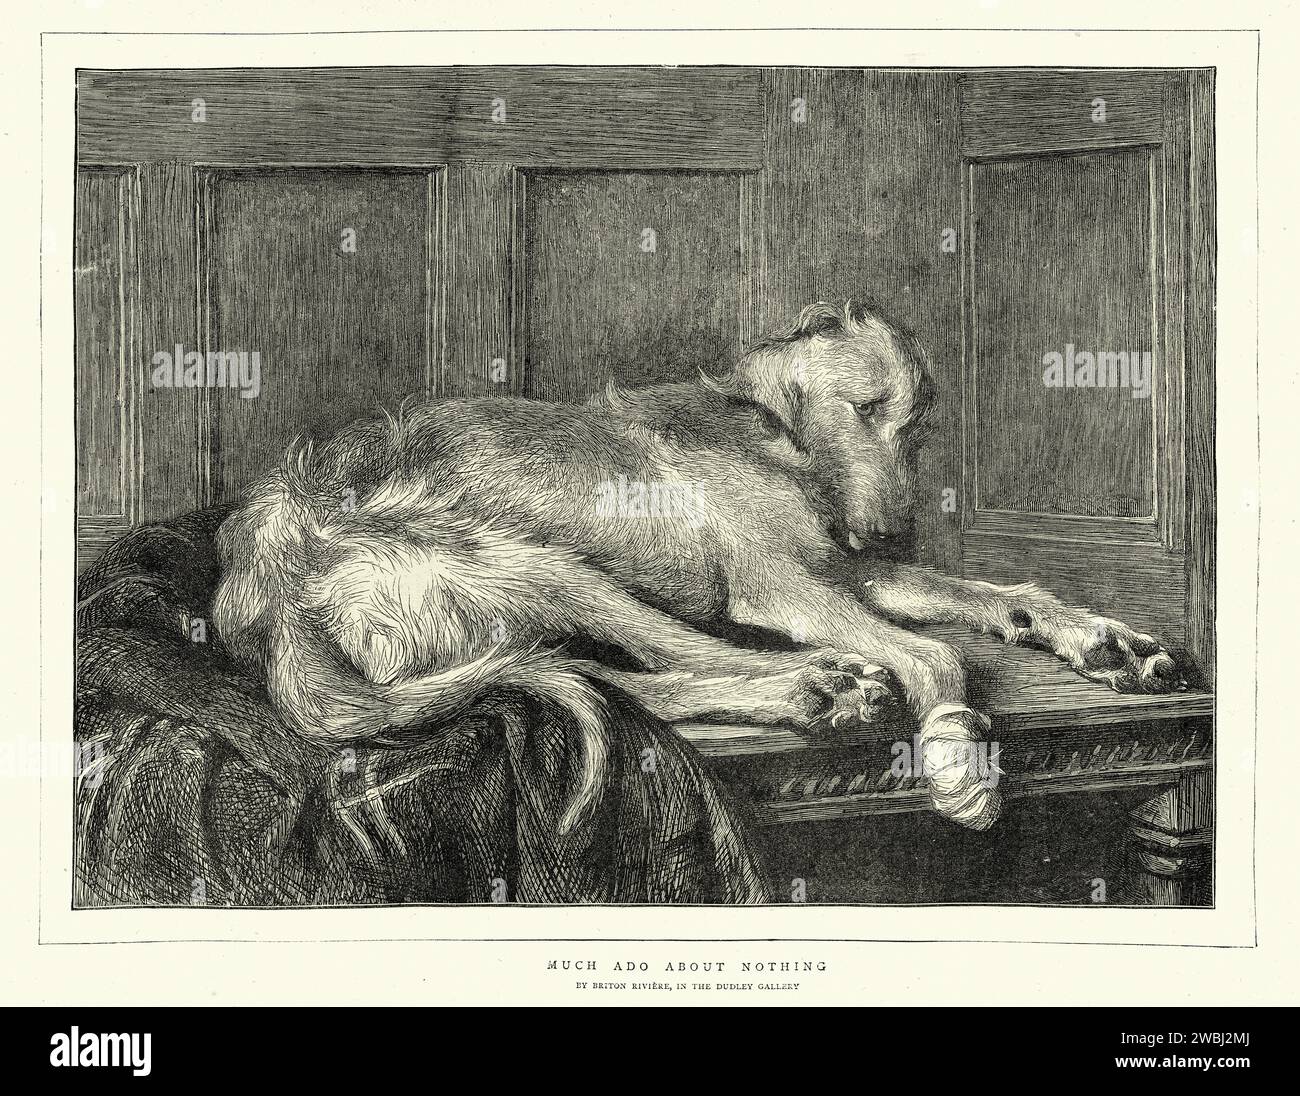 Vintage illustration of Sad dog with a bandage on his wounded paw, Victorian animal art, English, 1870s, after the painting Much ado about nothing, by Briton Riviere Stock Photo